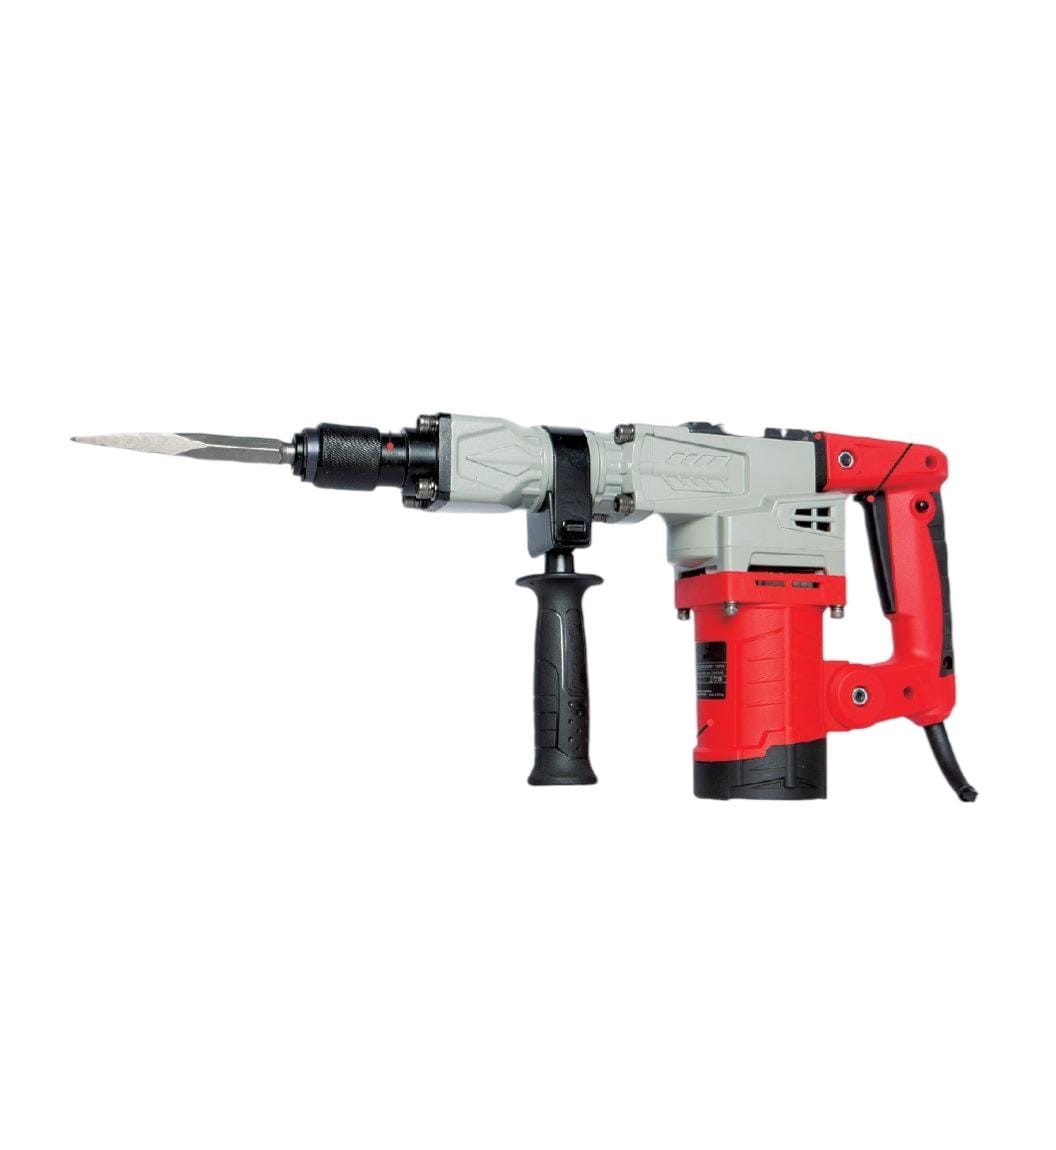 Refa 7kg Demolition Hammer 1500W with BMC Box and 2pcs Chisels Free